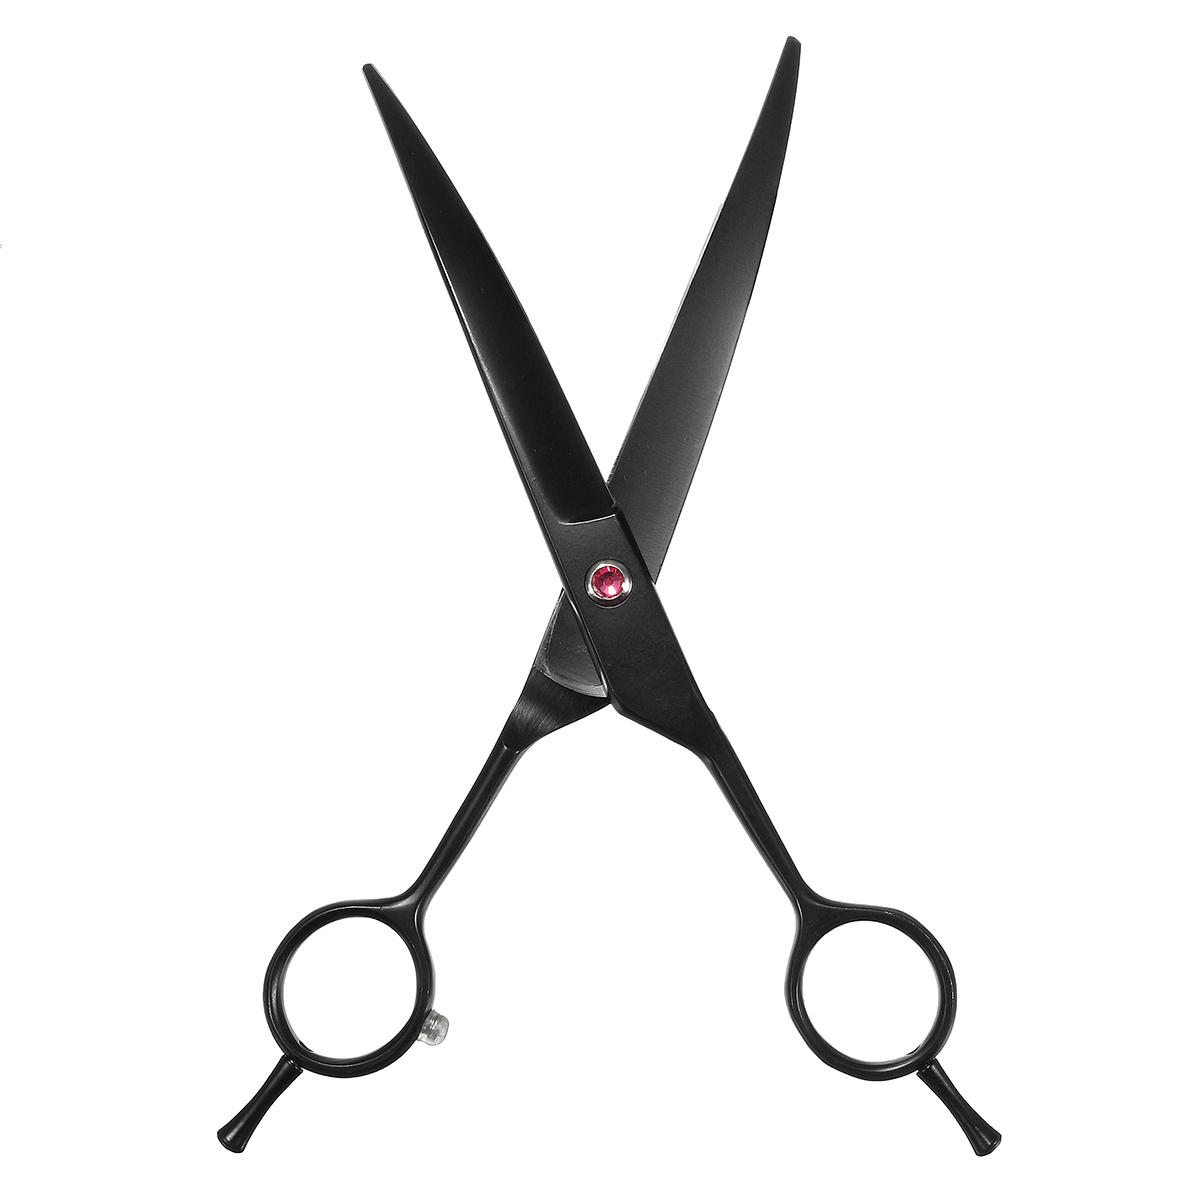 7" Professional Stainless Steel Pet Dog Grooming Scissors Curved Haircut Shears